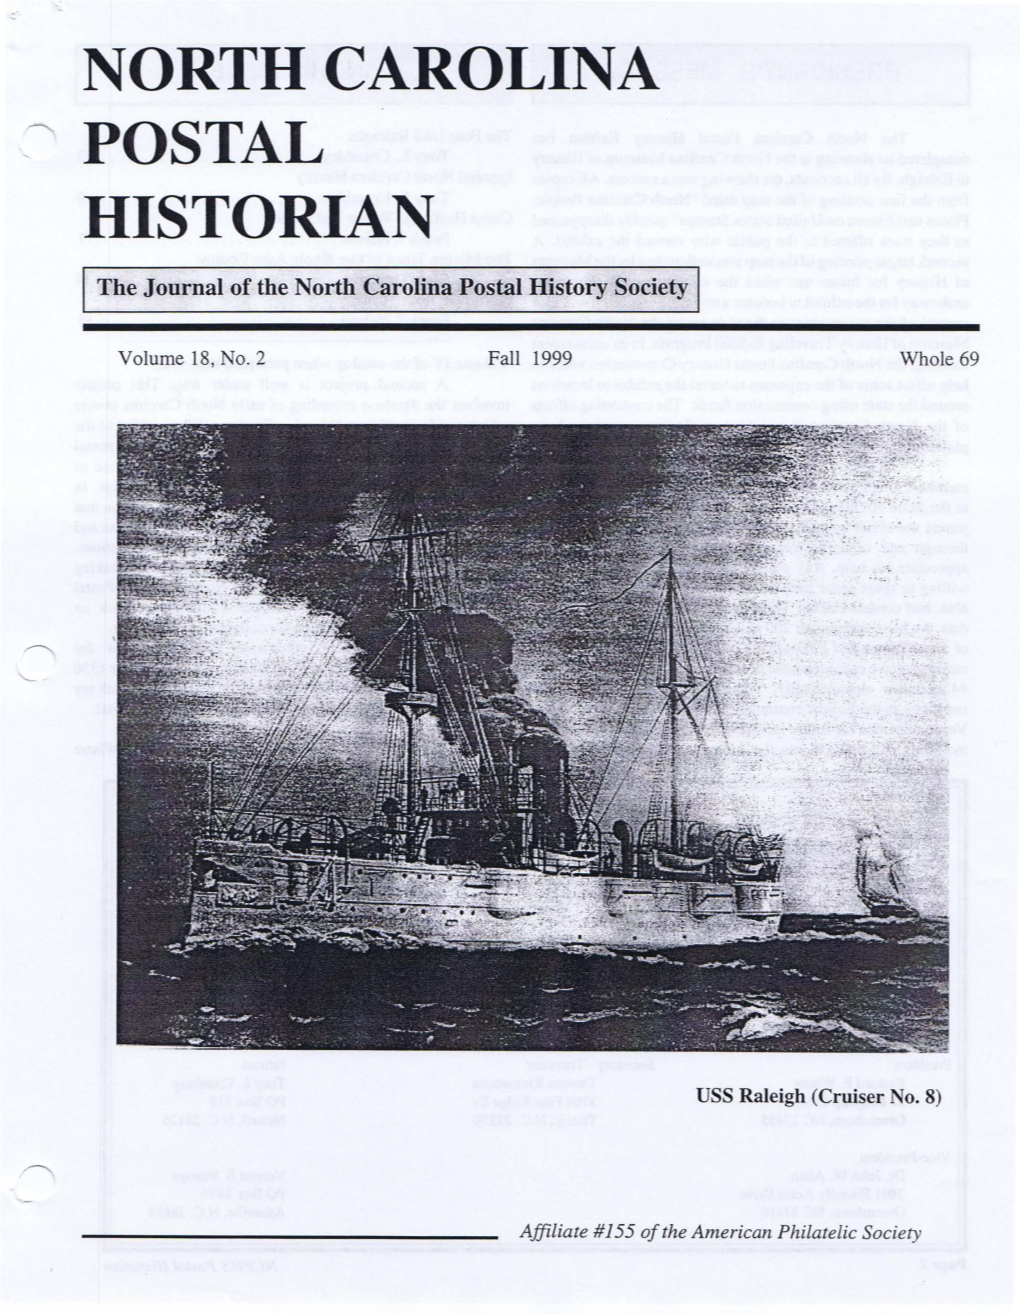 NCPHS Journal Issue 69 (Fall 1999)